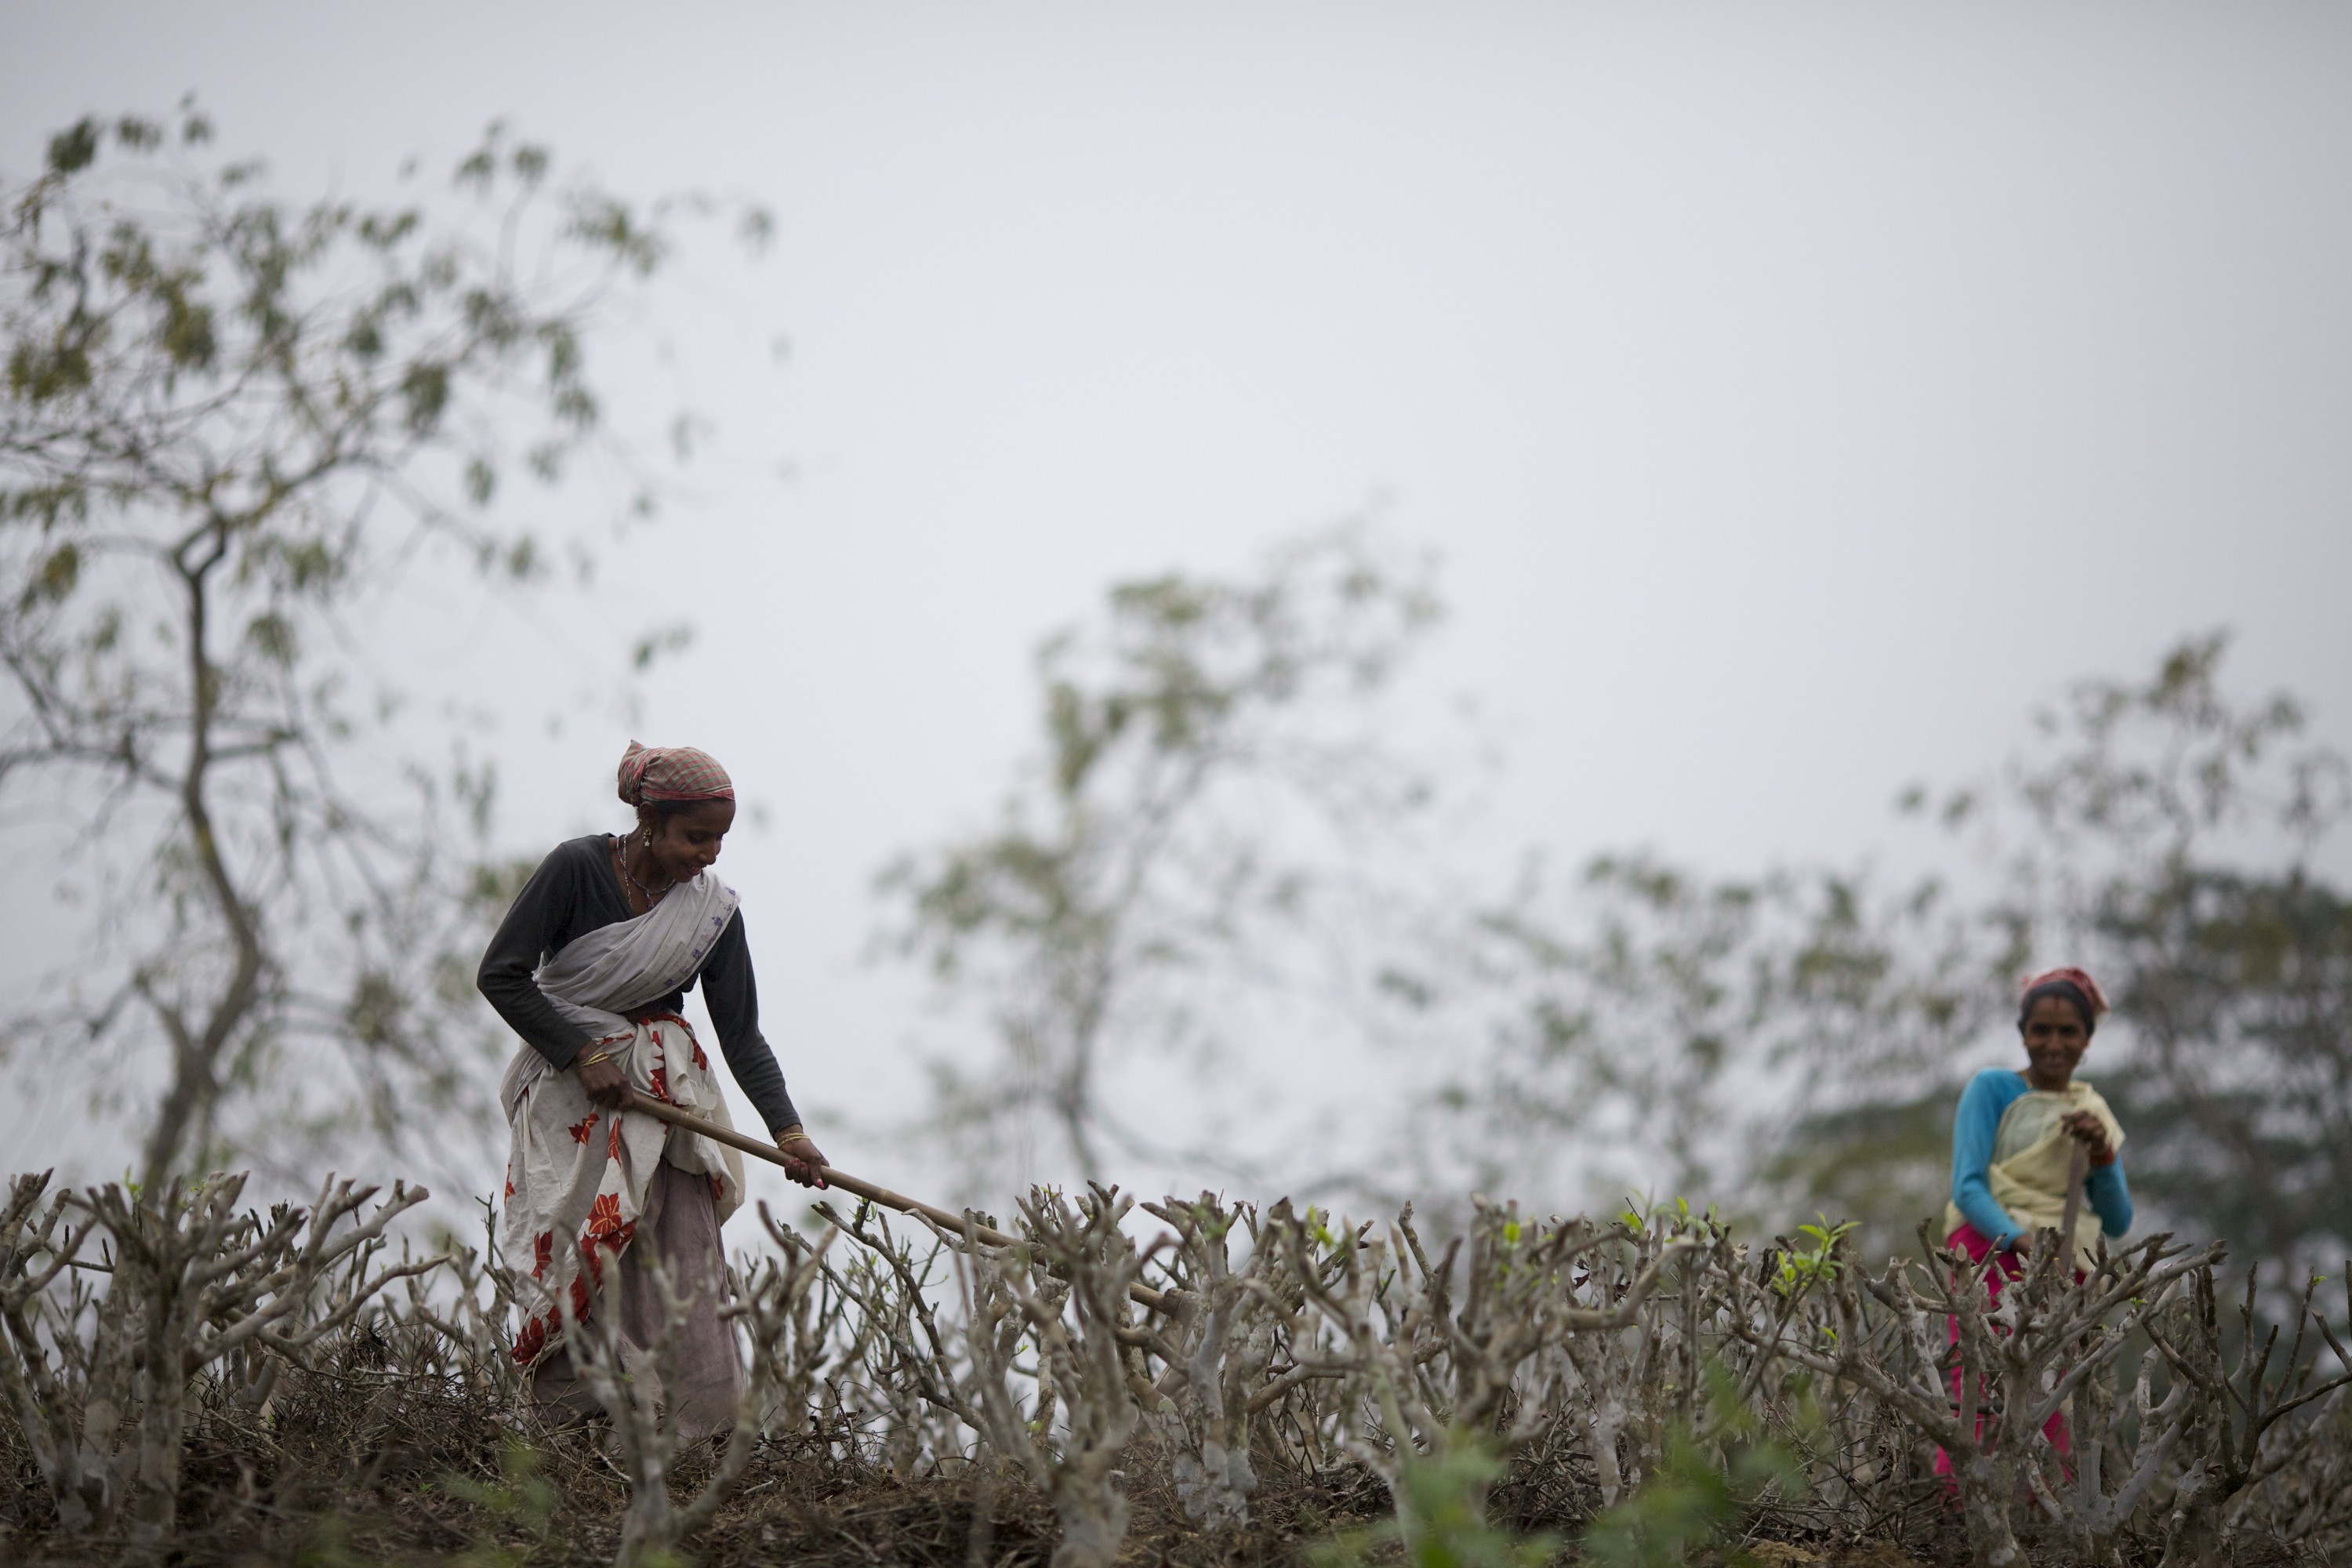 Women work in a tea plantation in Golaghat, India, on March 28, 2012 (Bloomberg/Getty Images)